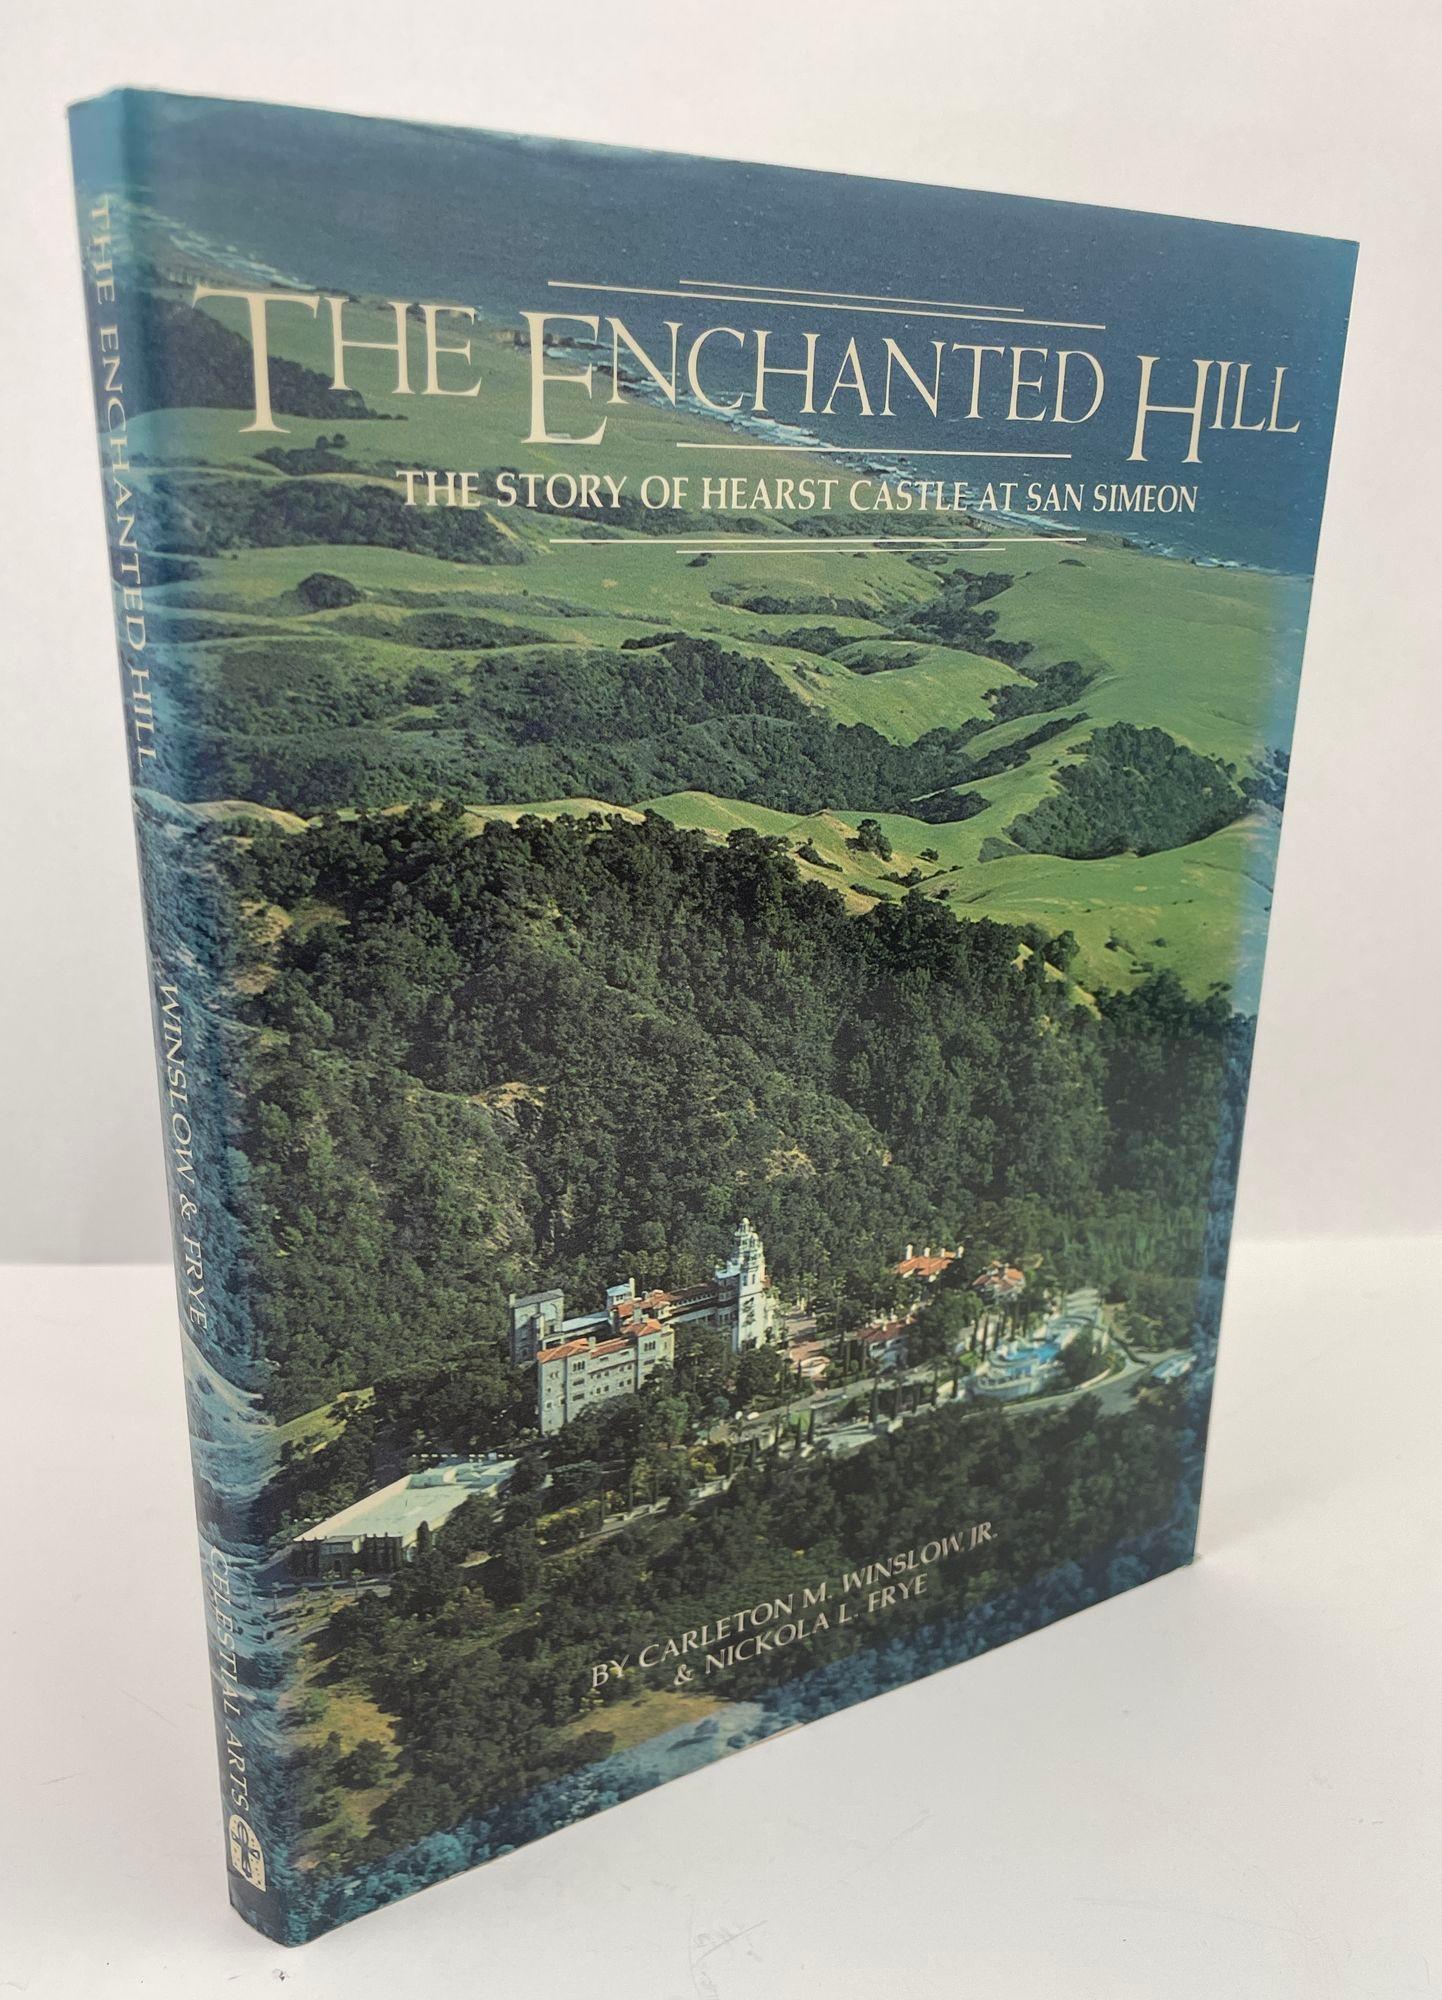 The Enchanted Hill The story of Hearst Castle at San Simeon Hardcover 1980 In Good Condition For Sale In North Hollywood, CA